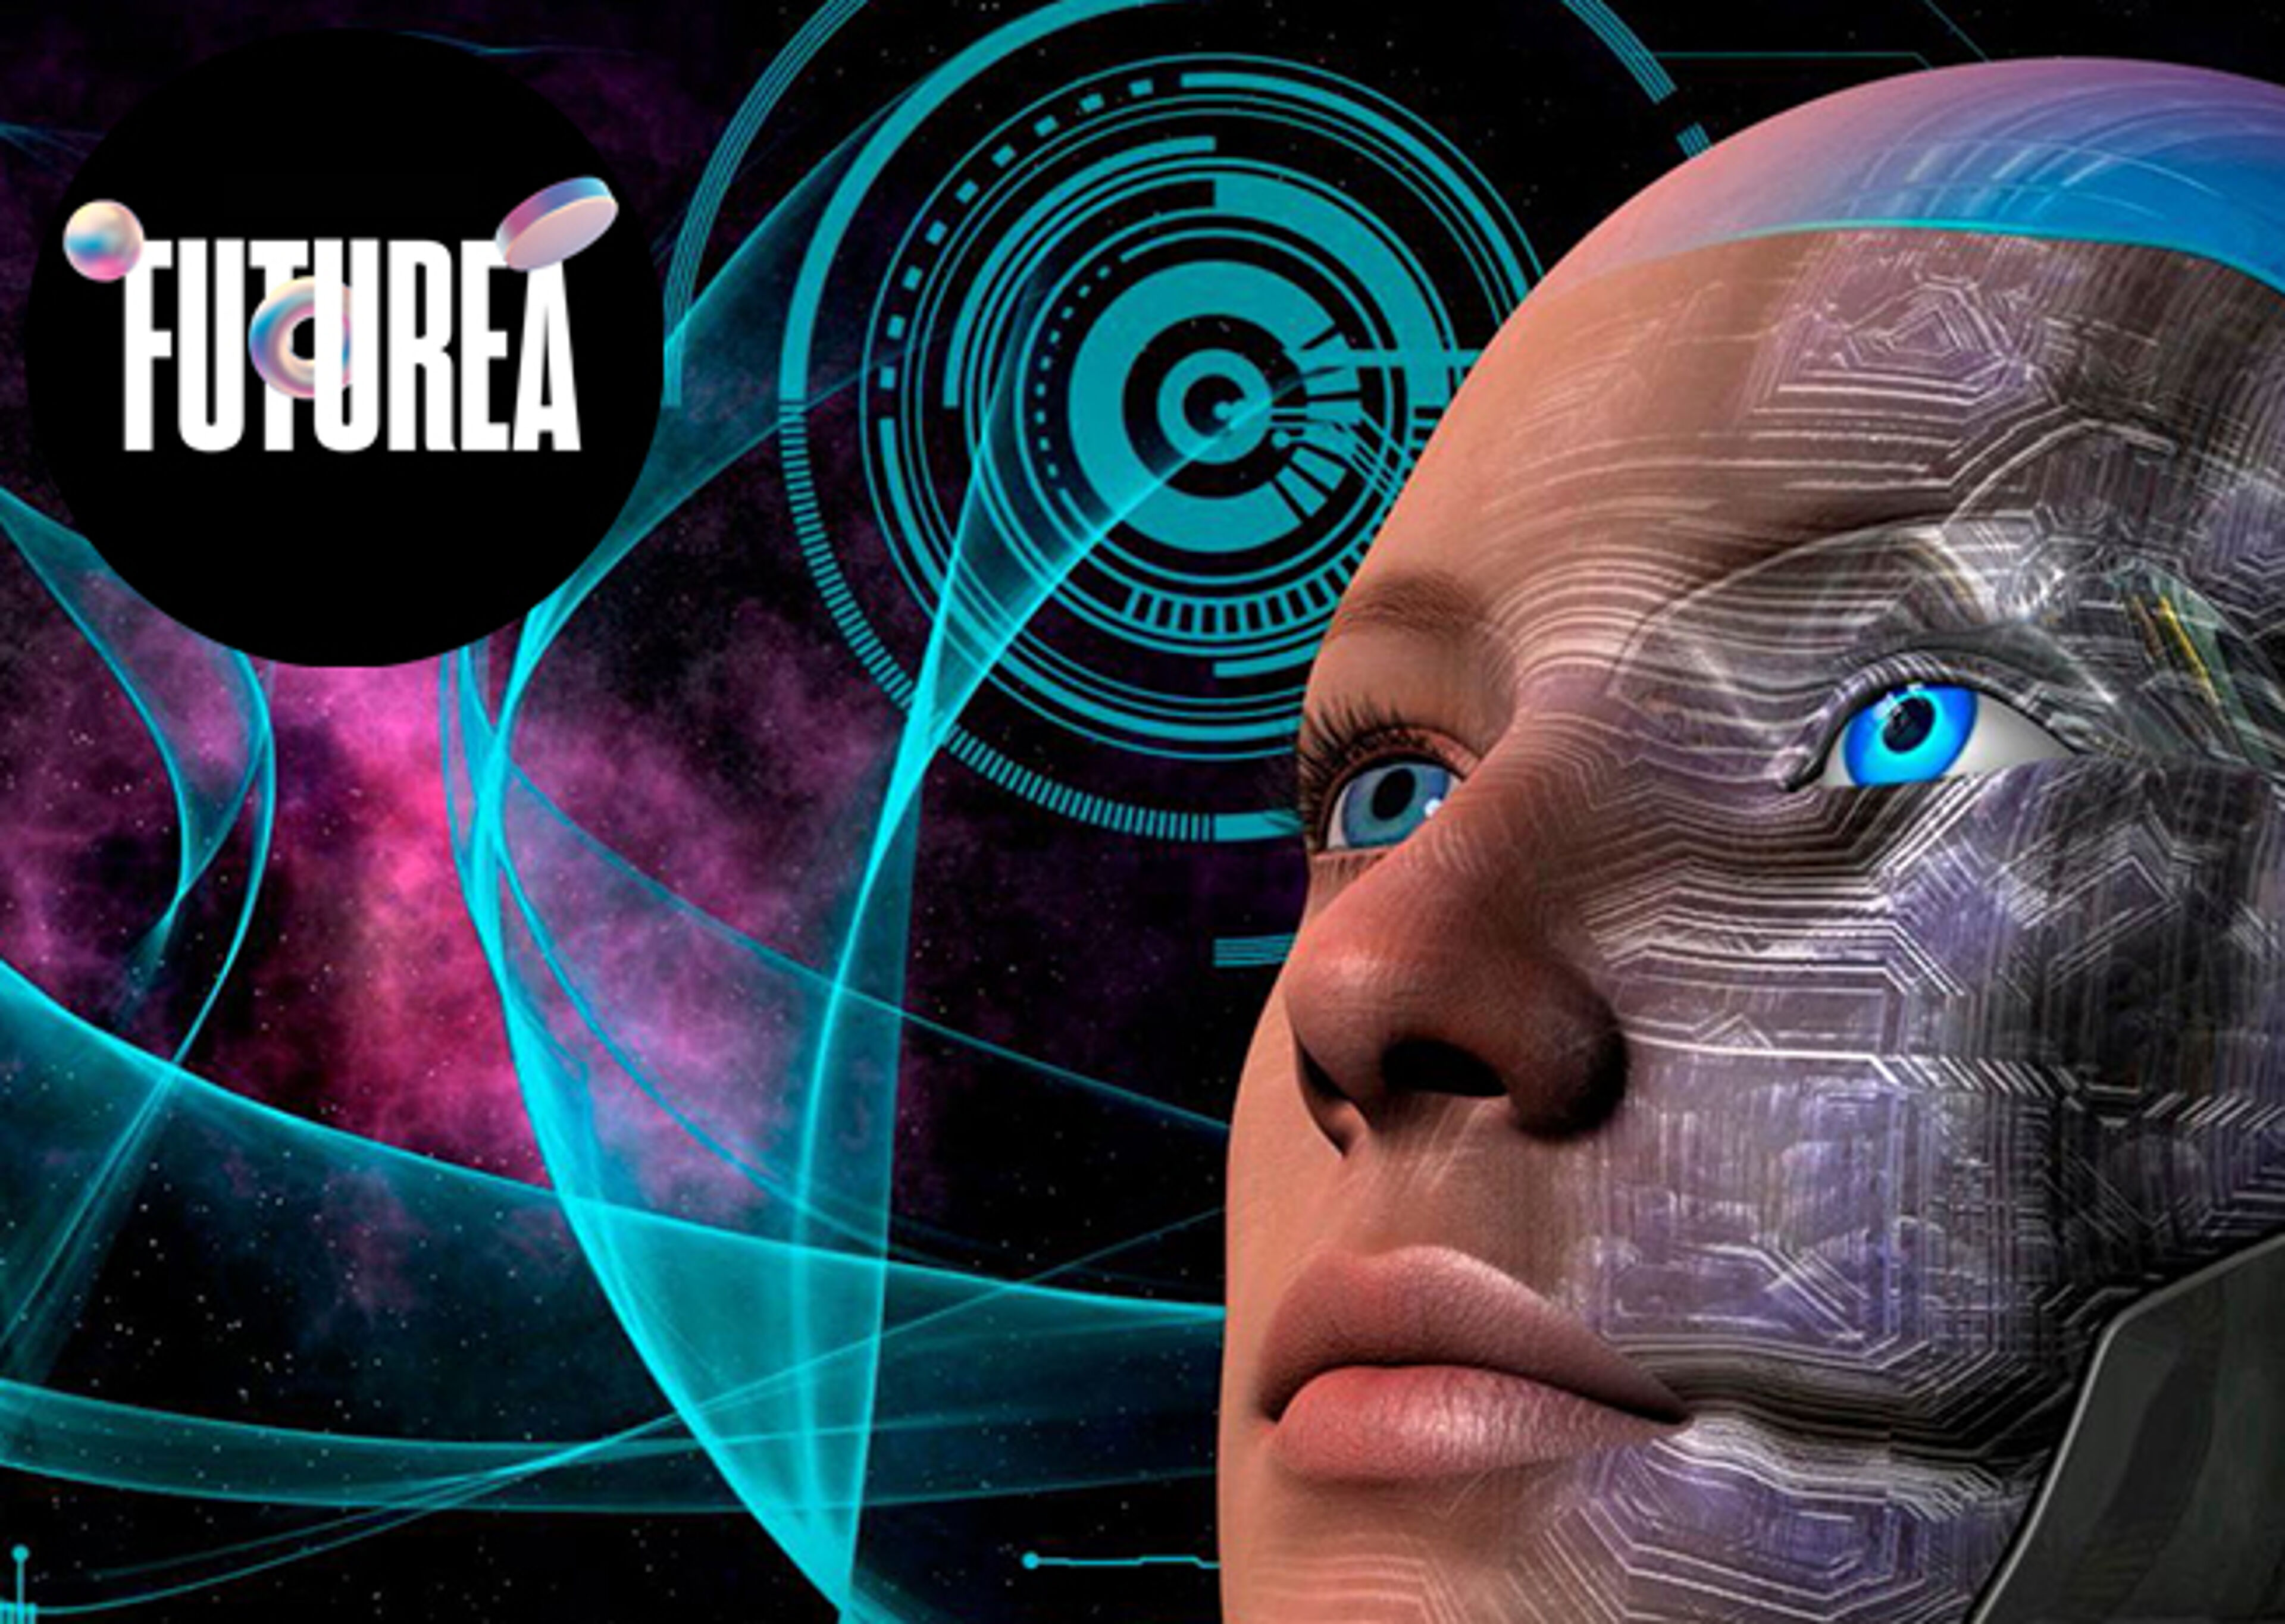 Digital art depicting a robotic face with a cosmic background, symbolizing advanced artificial intelligence.